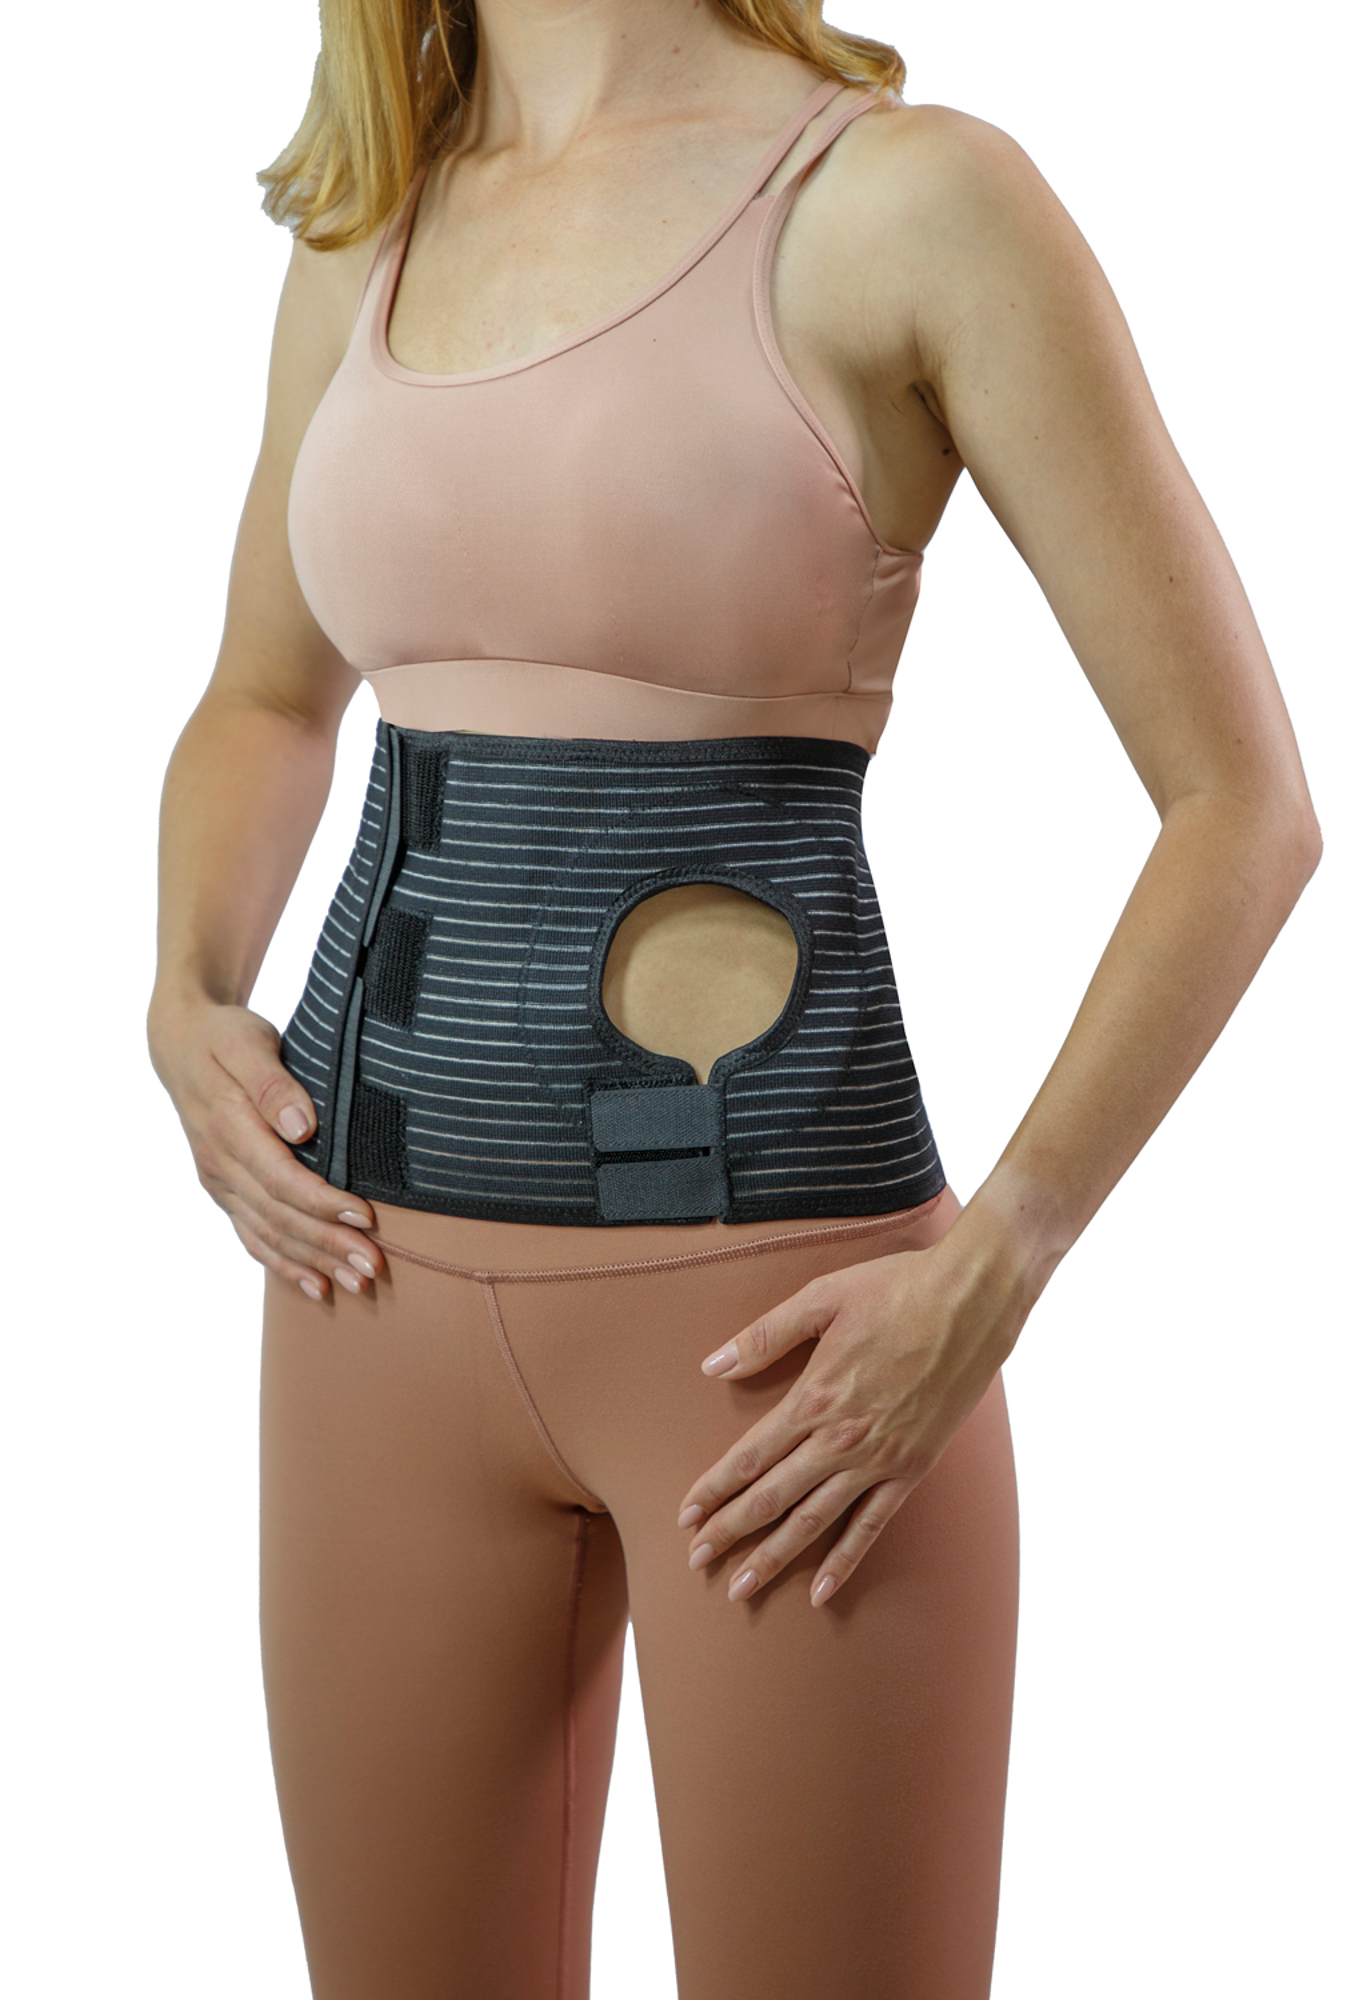 ORTONYX Abdominal Ostomy Belt for Post-Operative Care After Colostomy –  UFEELGOOD